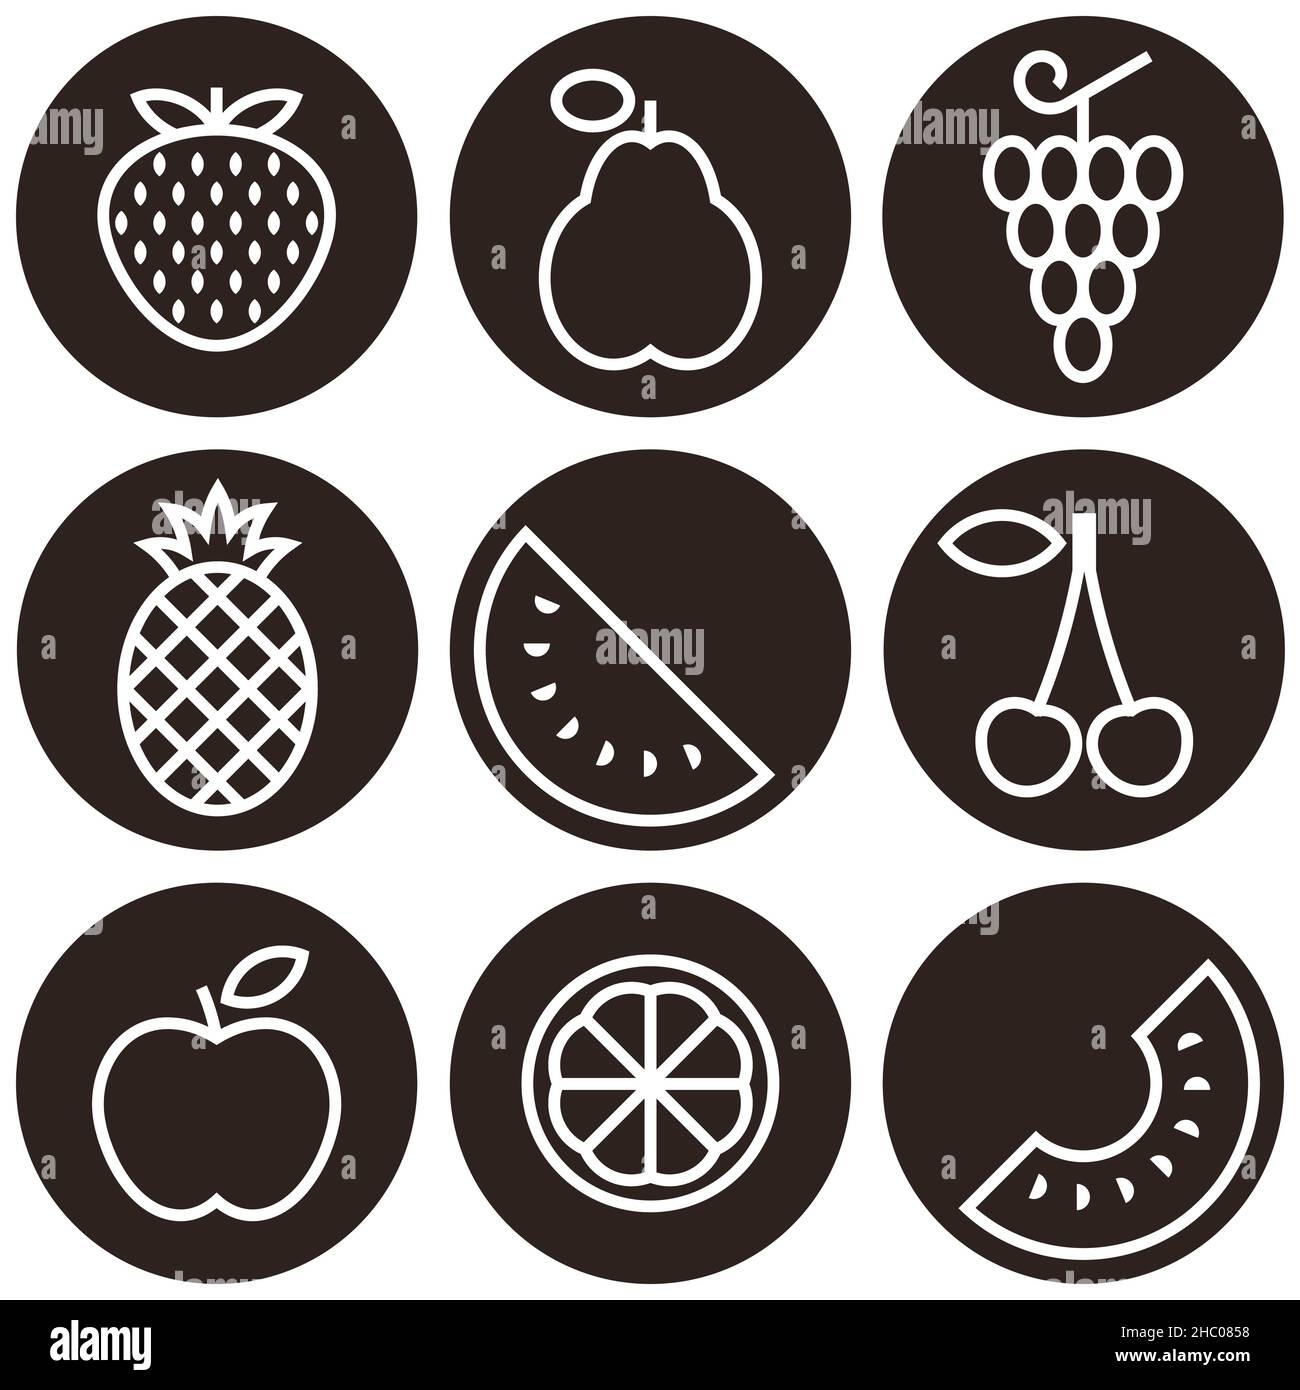 Fruits icon set - grapes, apple, pear, cherry, quince, strawberry ...